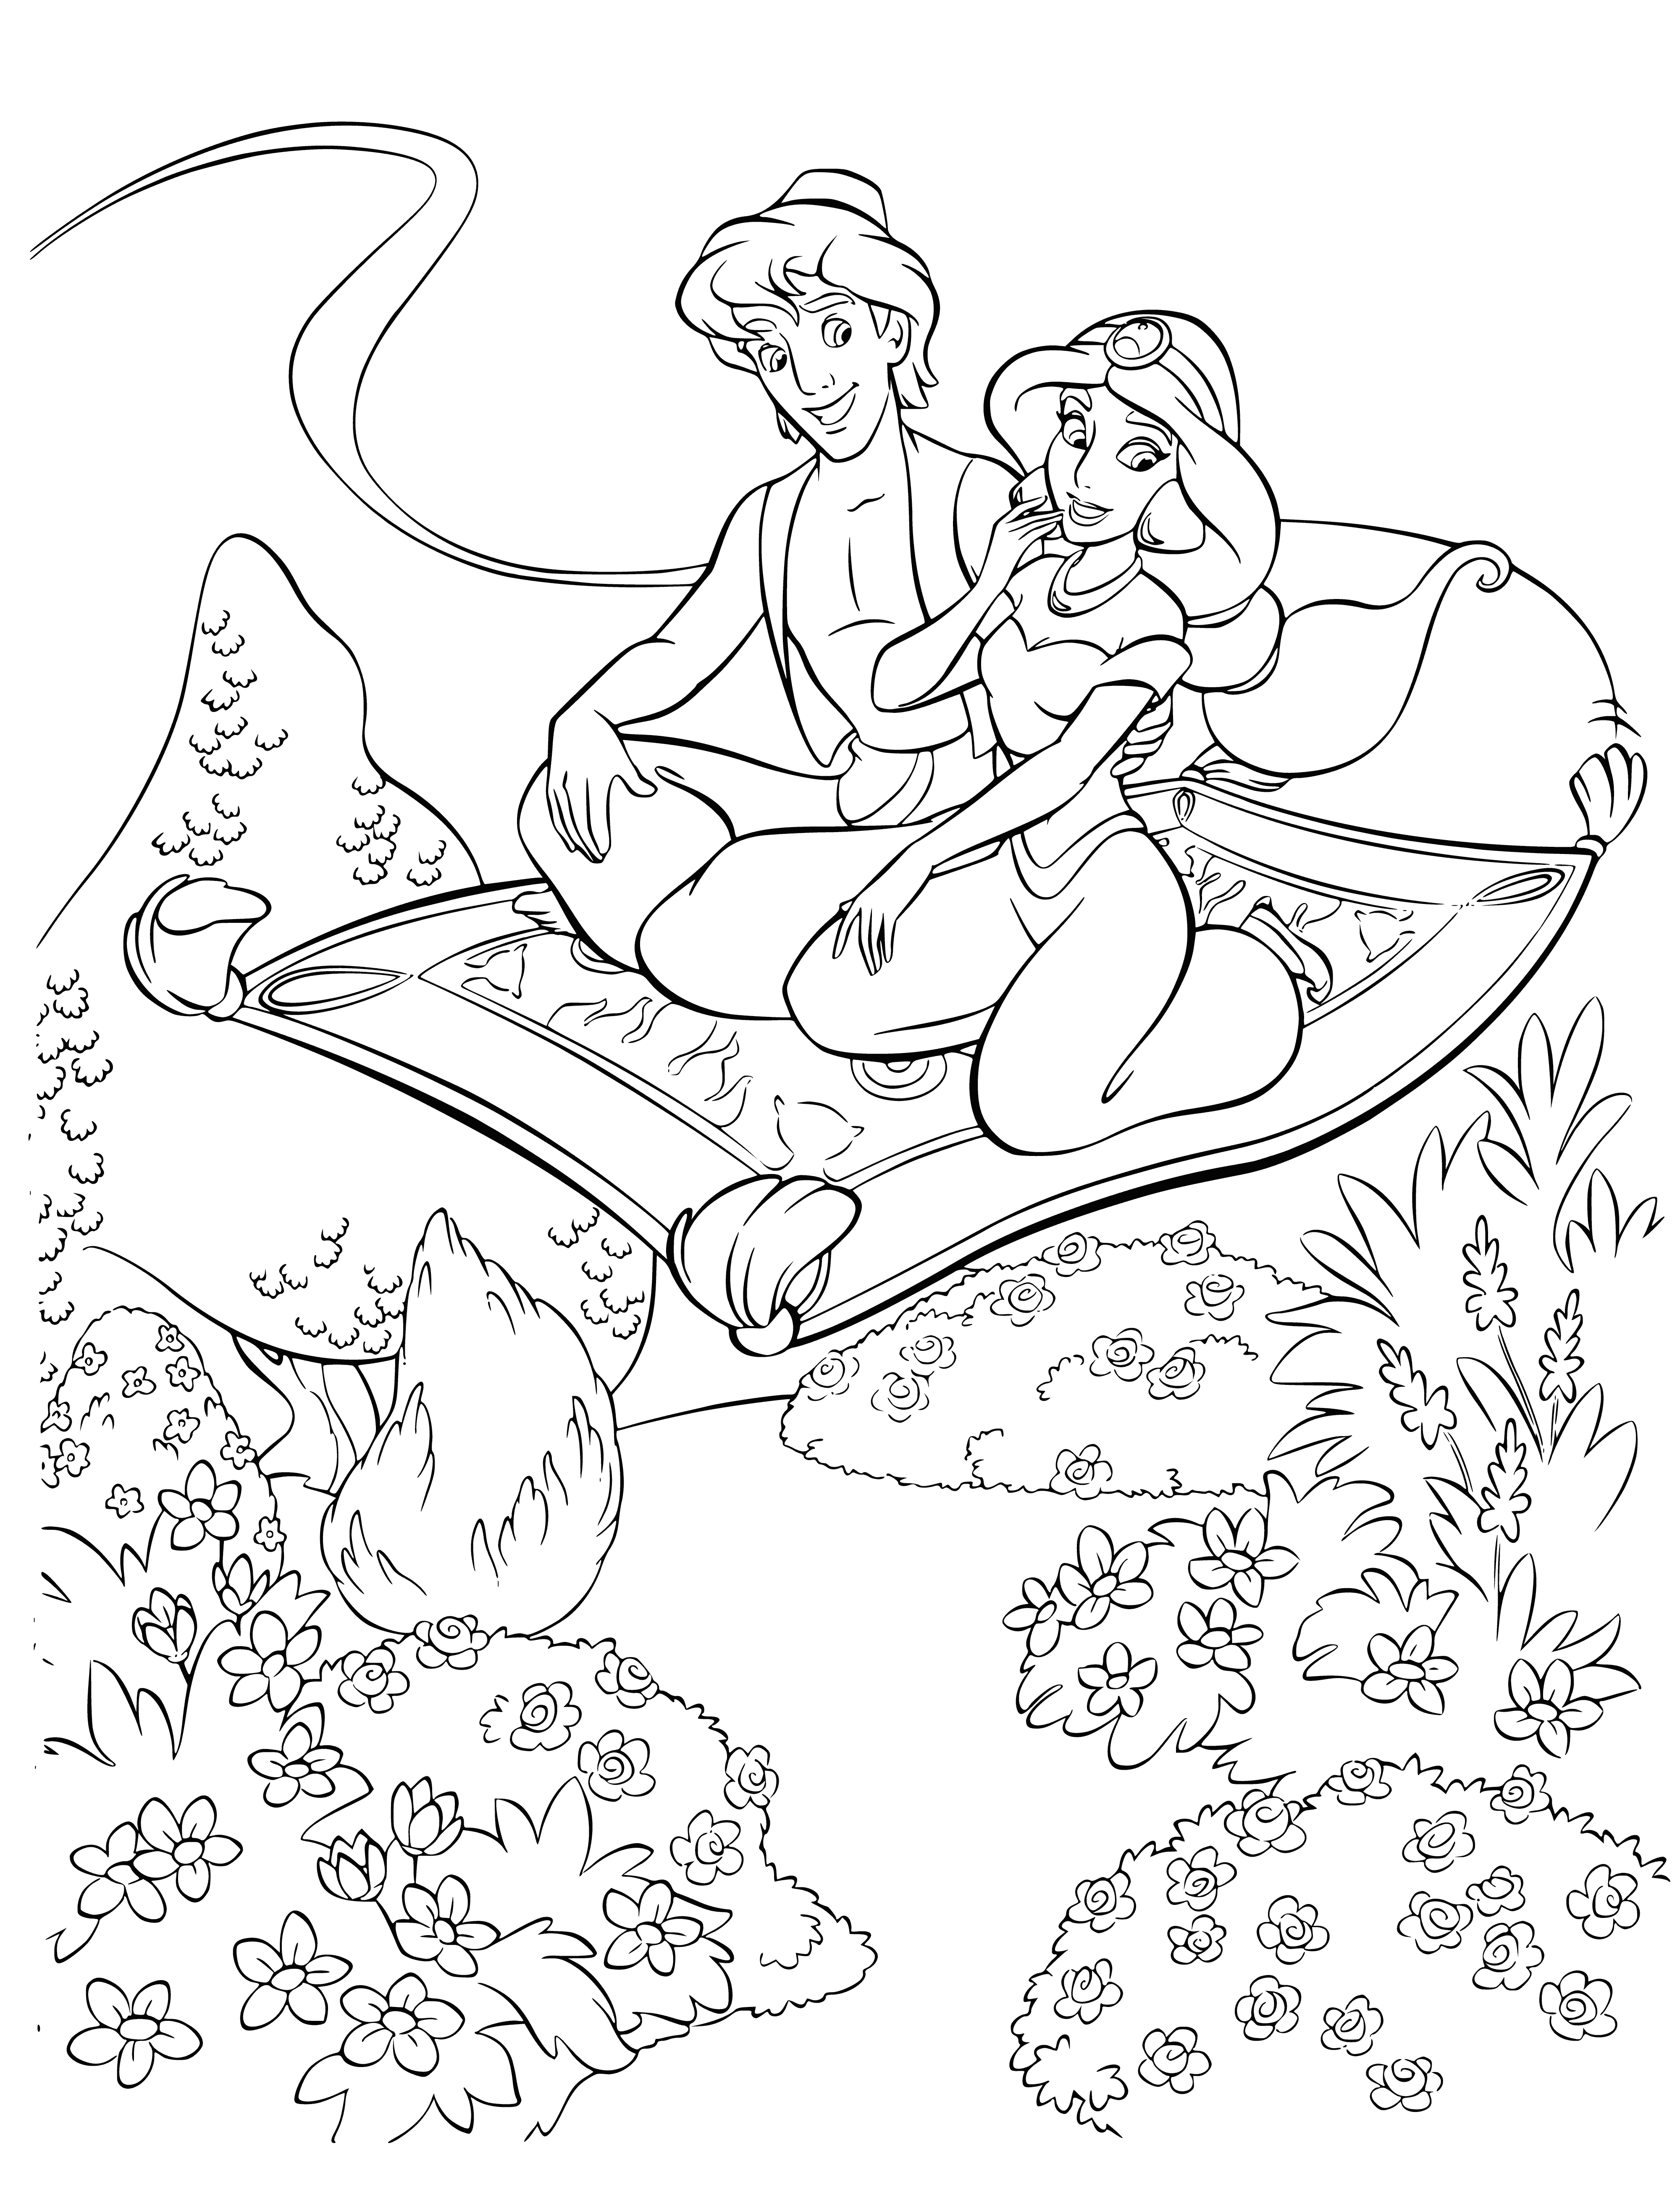 Aladdin and Jasmine on the magic carpet coloring page